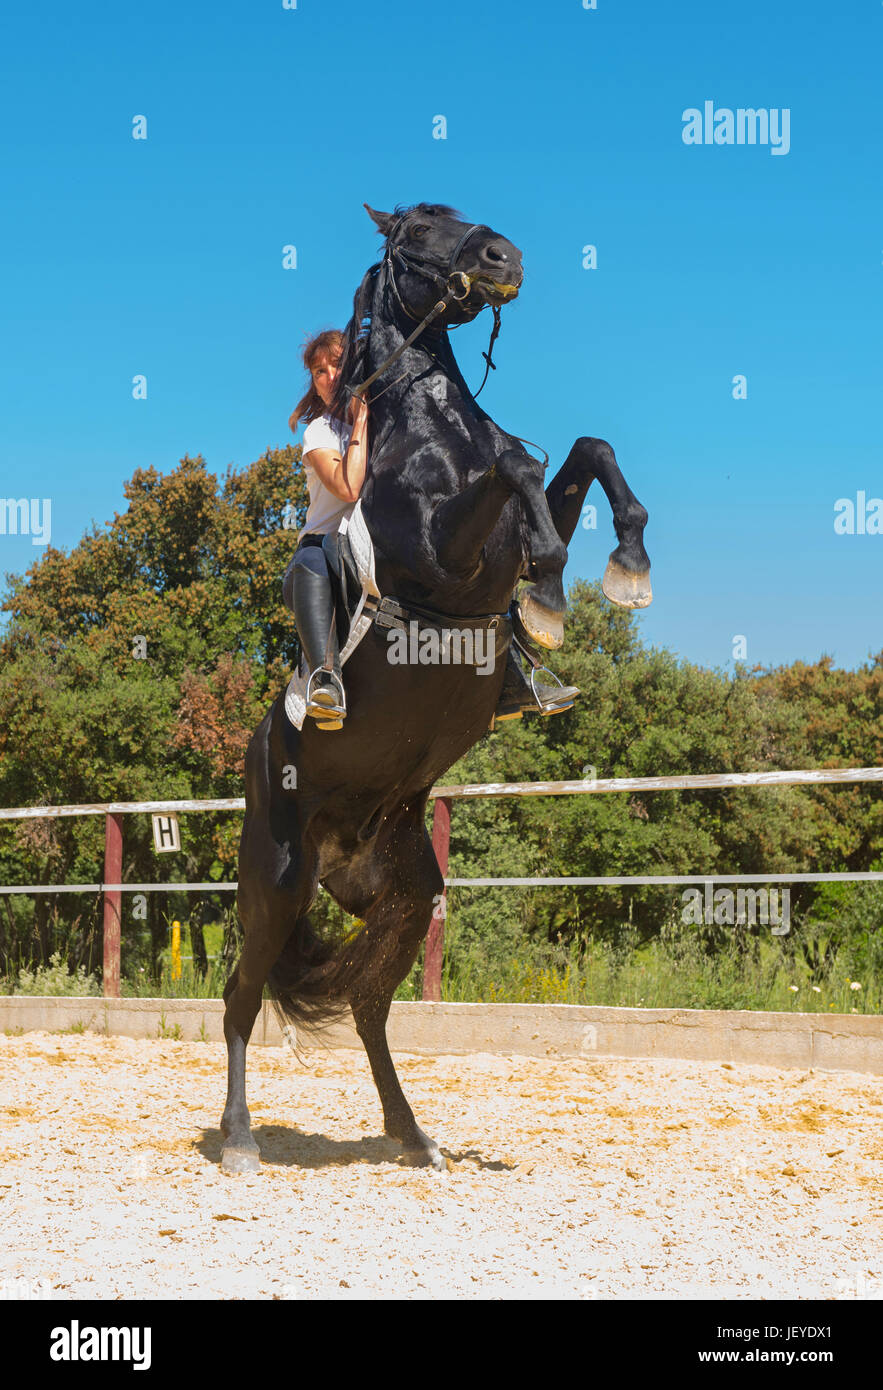 trianing of dressage for a riding girl and stallion Stock Photo